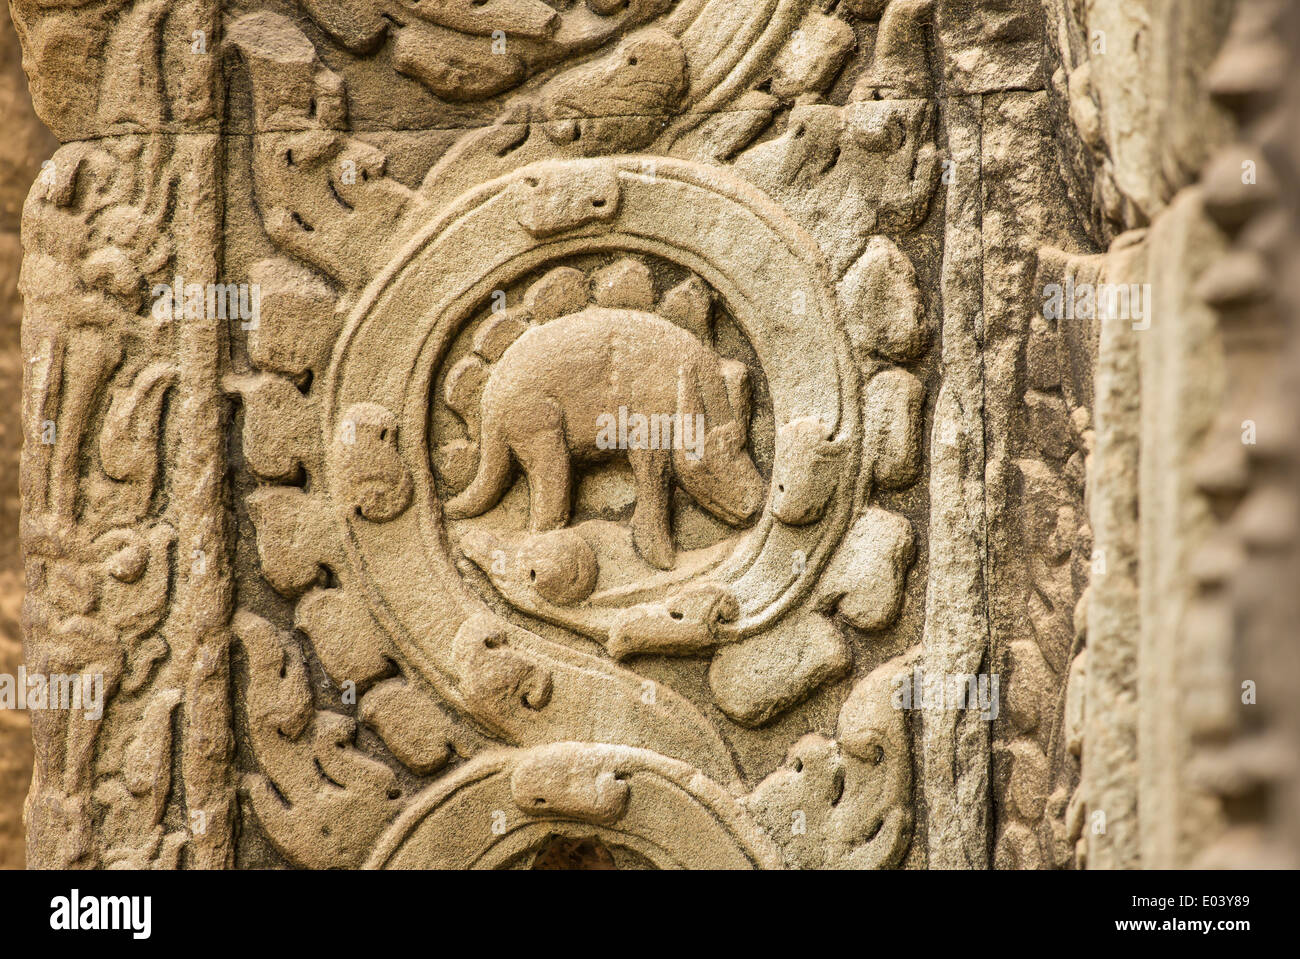 Stegosaurus bas-relief on the wall of Ta Prohm temple at Angkor Wat complex, Siem Reap, Cambodia Stock Photo